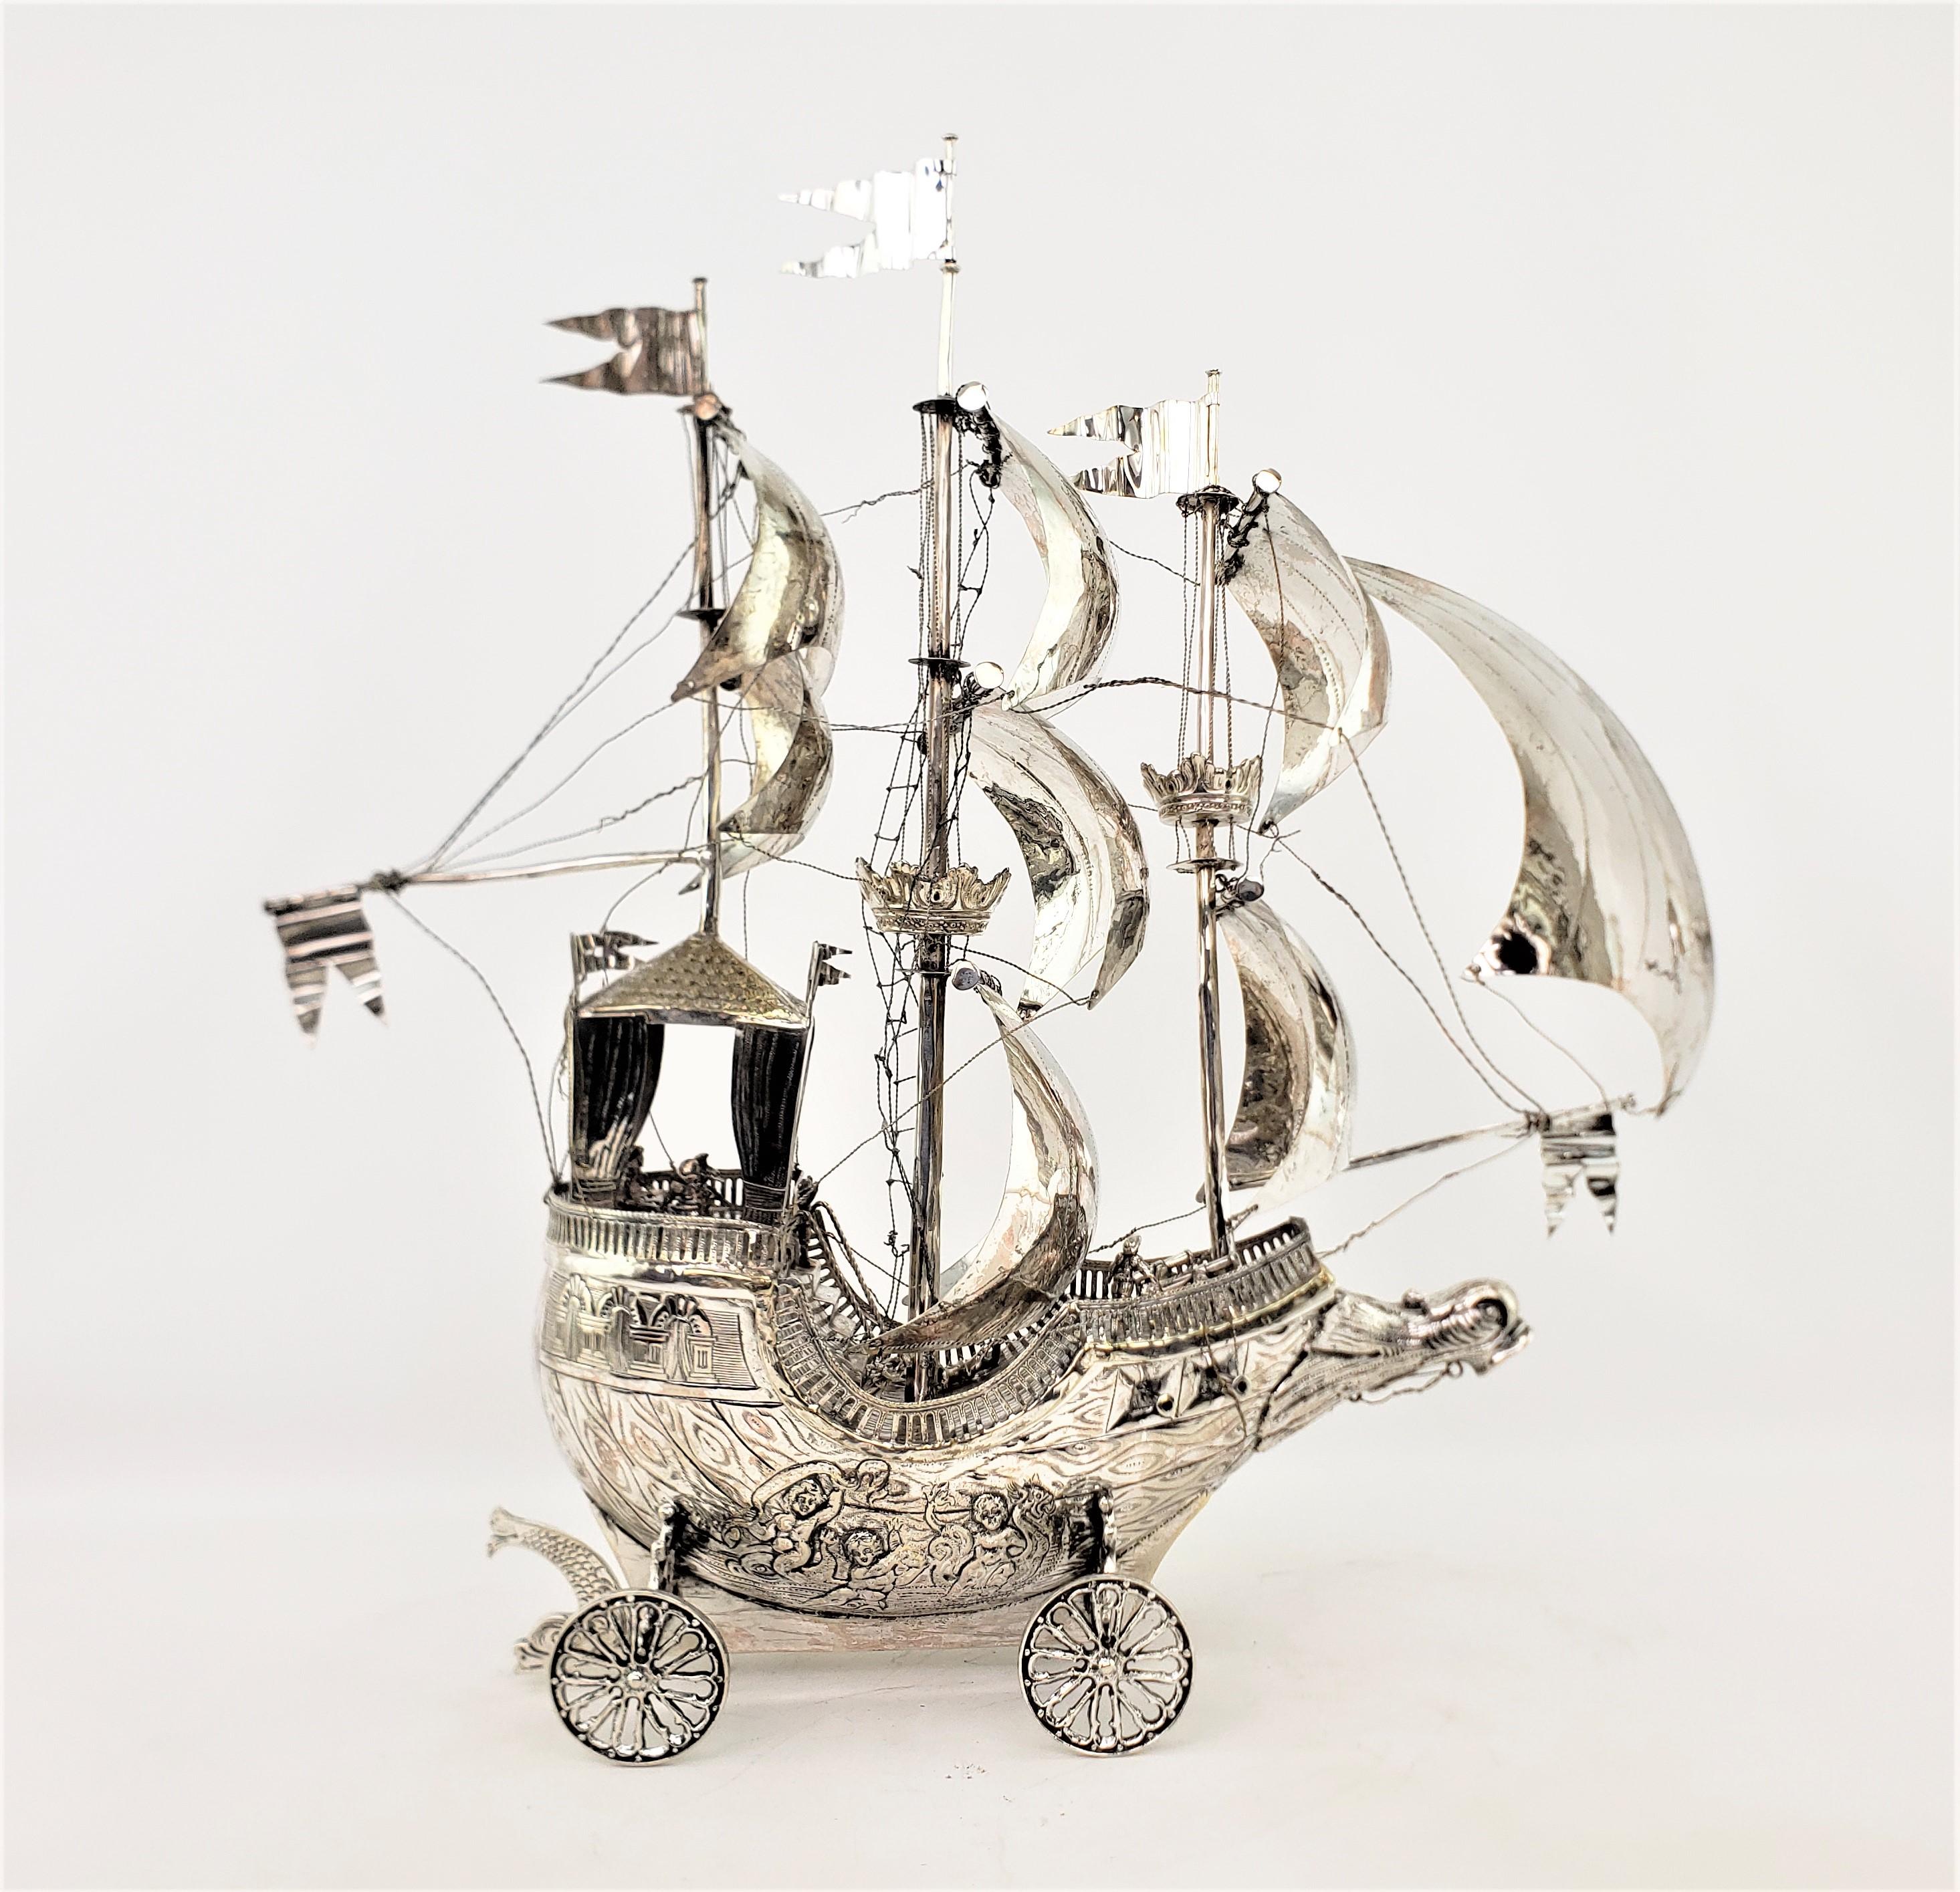 20th Century Large Antique Silver Plated Nef or 3 Mast Sailing Ship Sculpture or Centerpiece For Sale